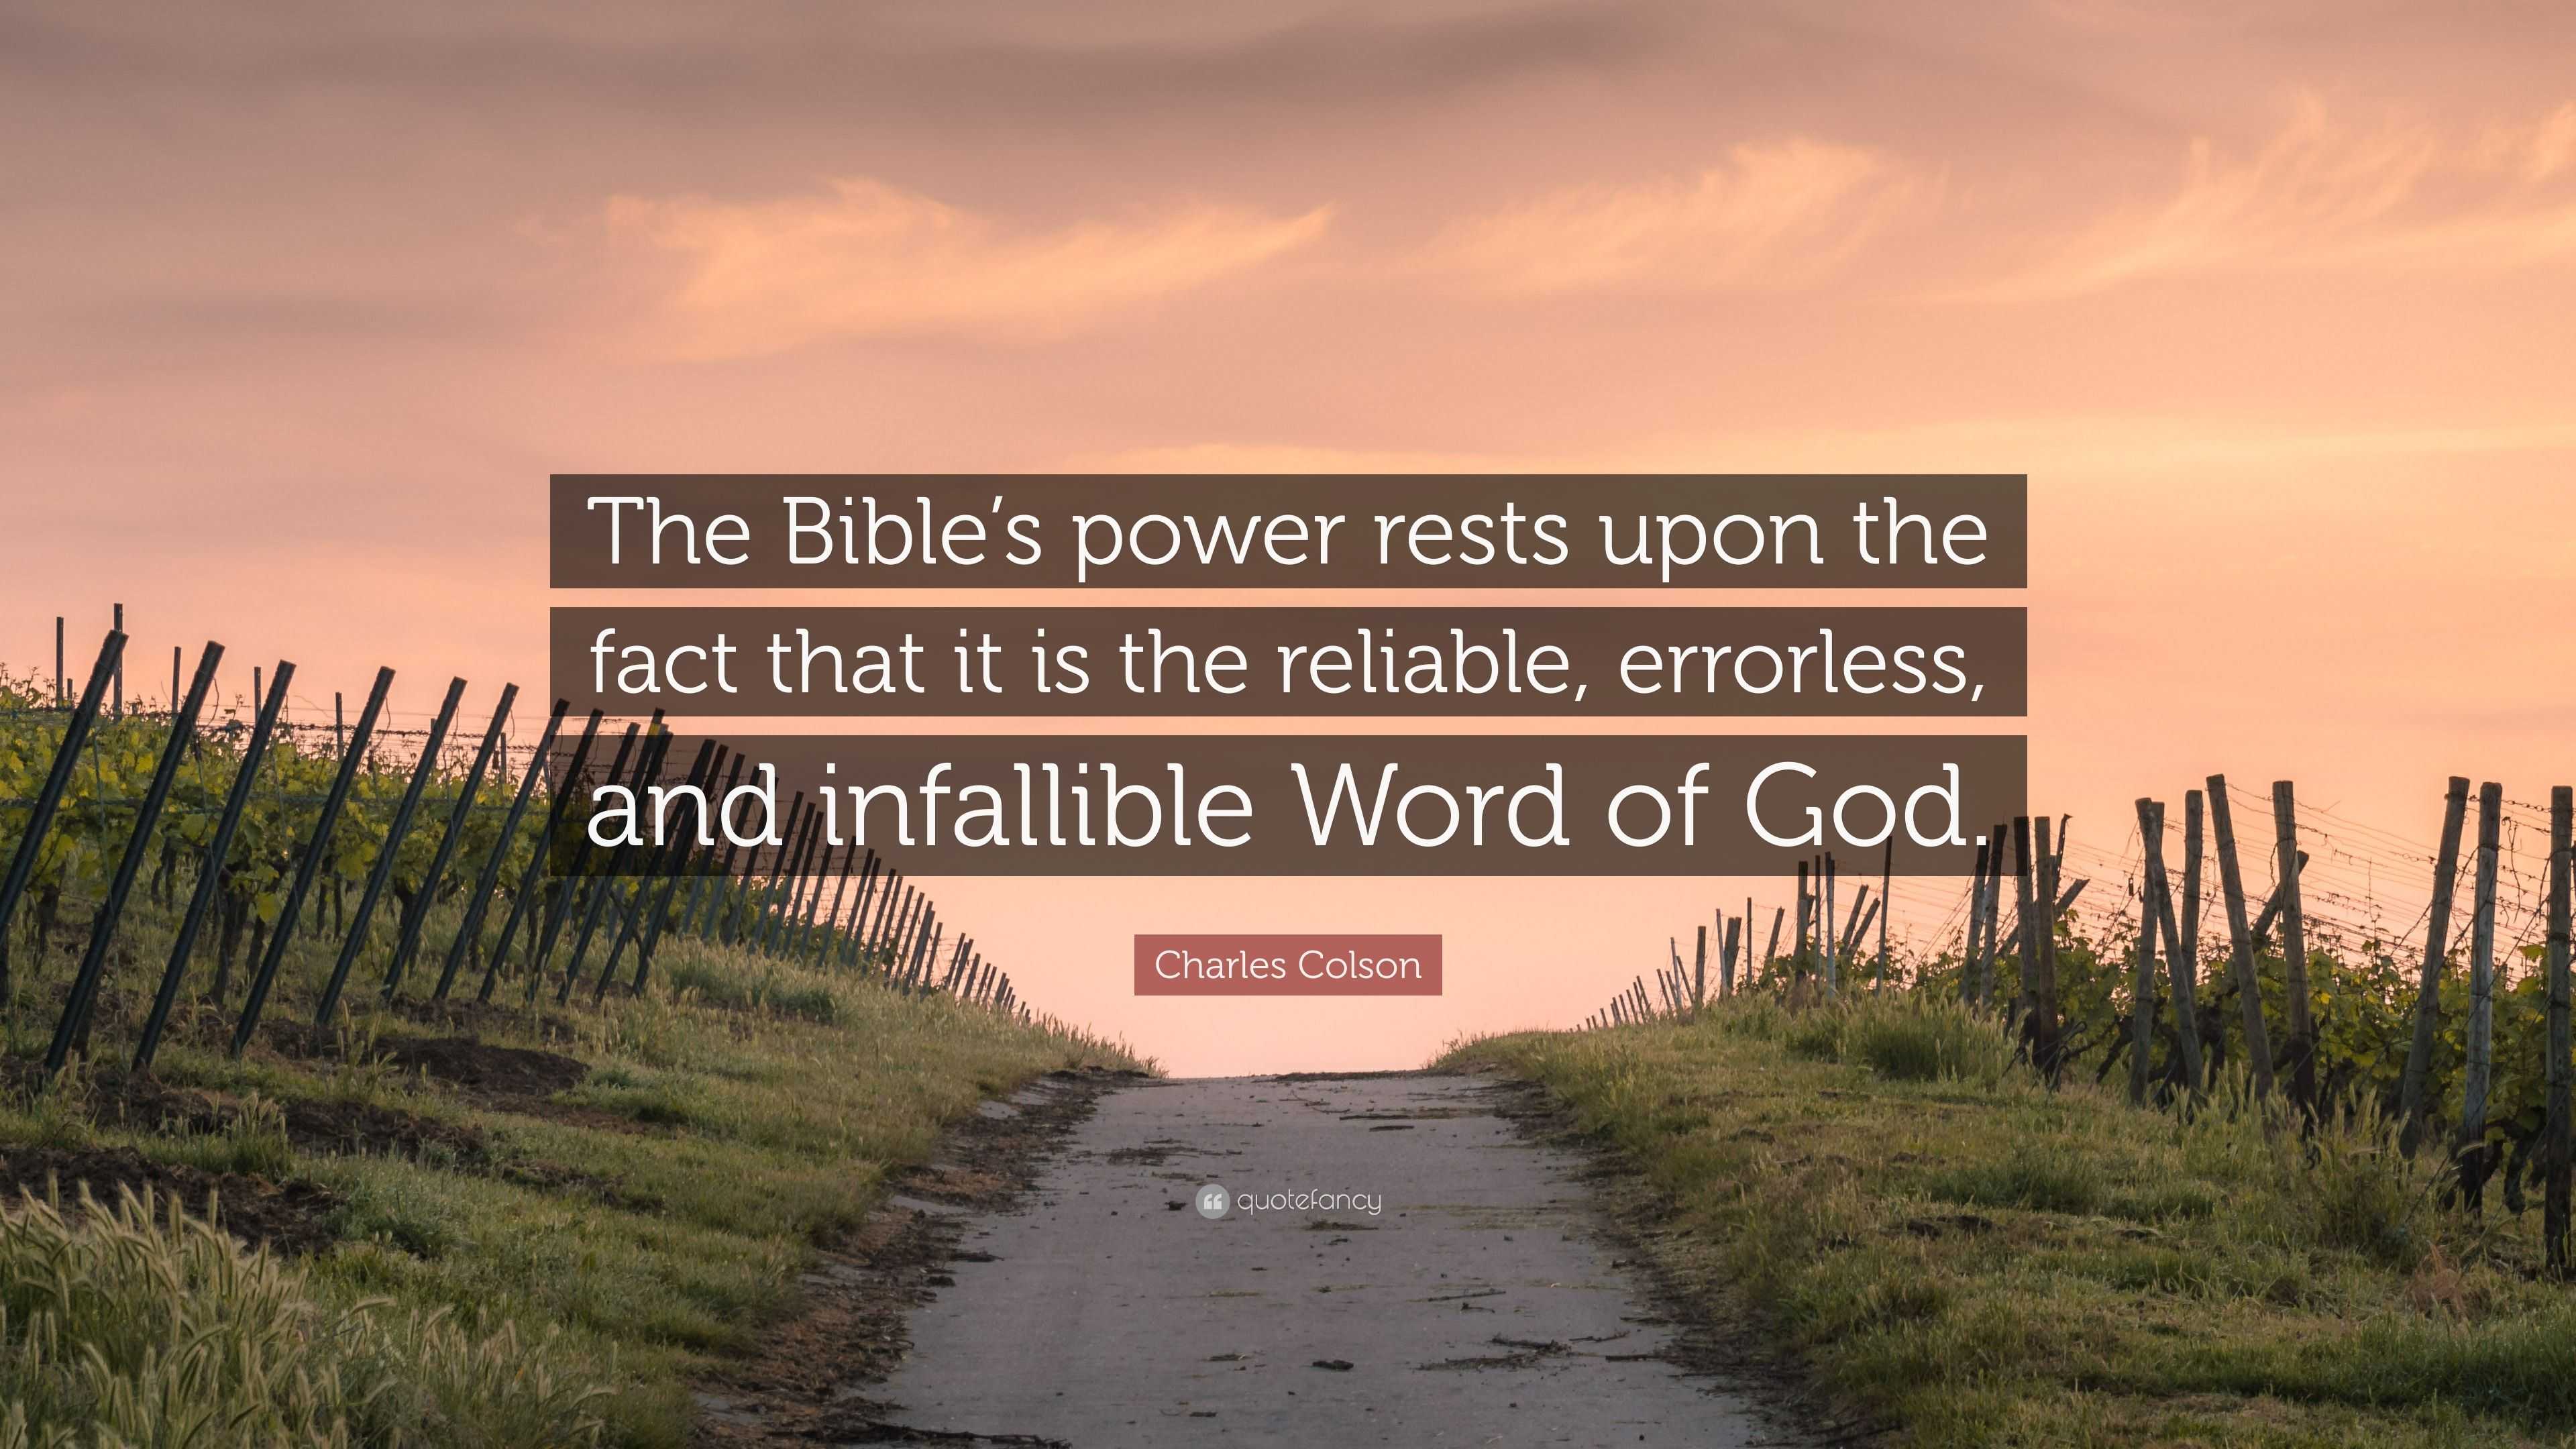 Charles Colson Quote: “The Bible’s power rests upon the fact that it is ...